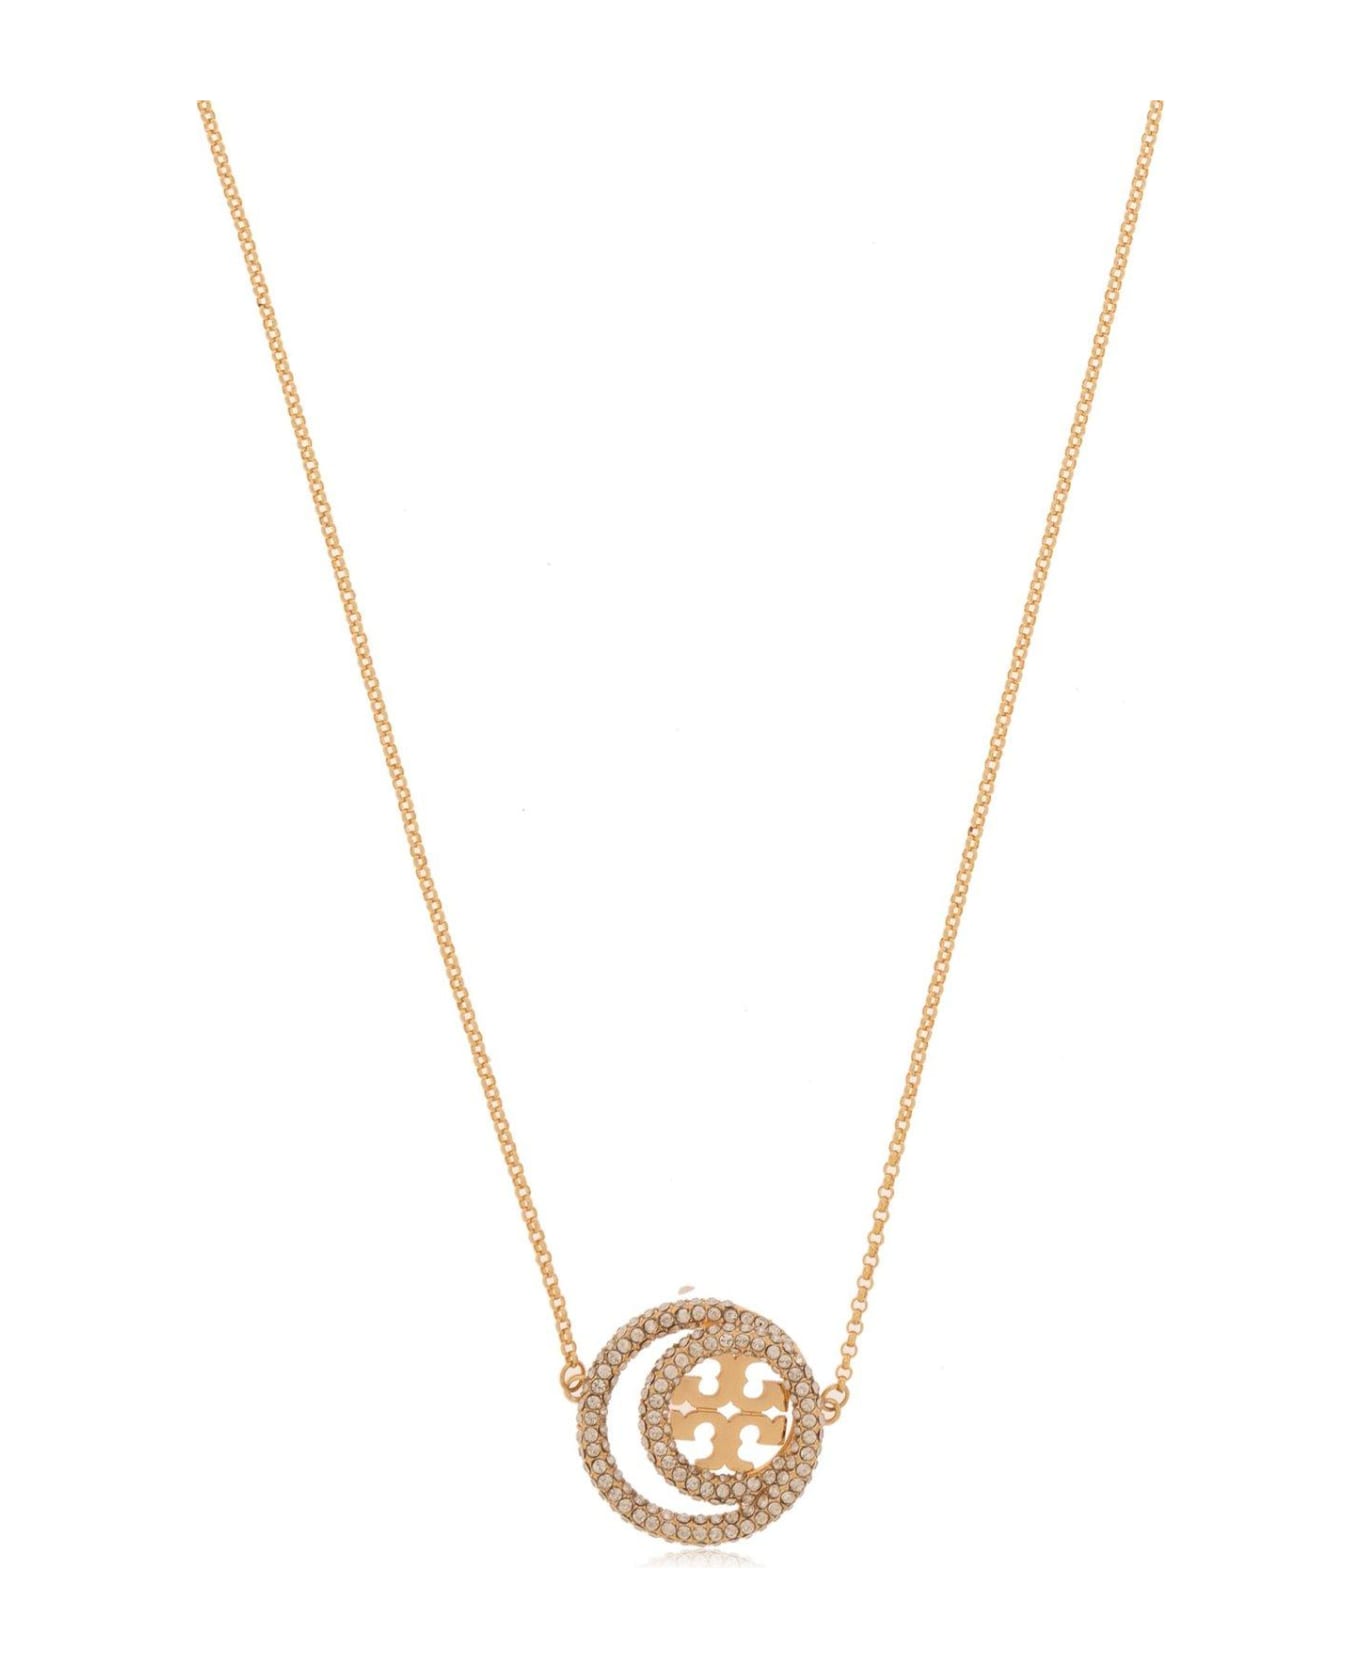 Tory Burch Miller Double Ring Pendant Embellished Necklace - Gold/crystal ネックレス